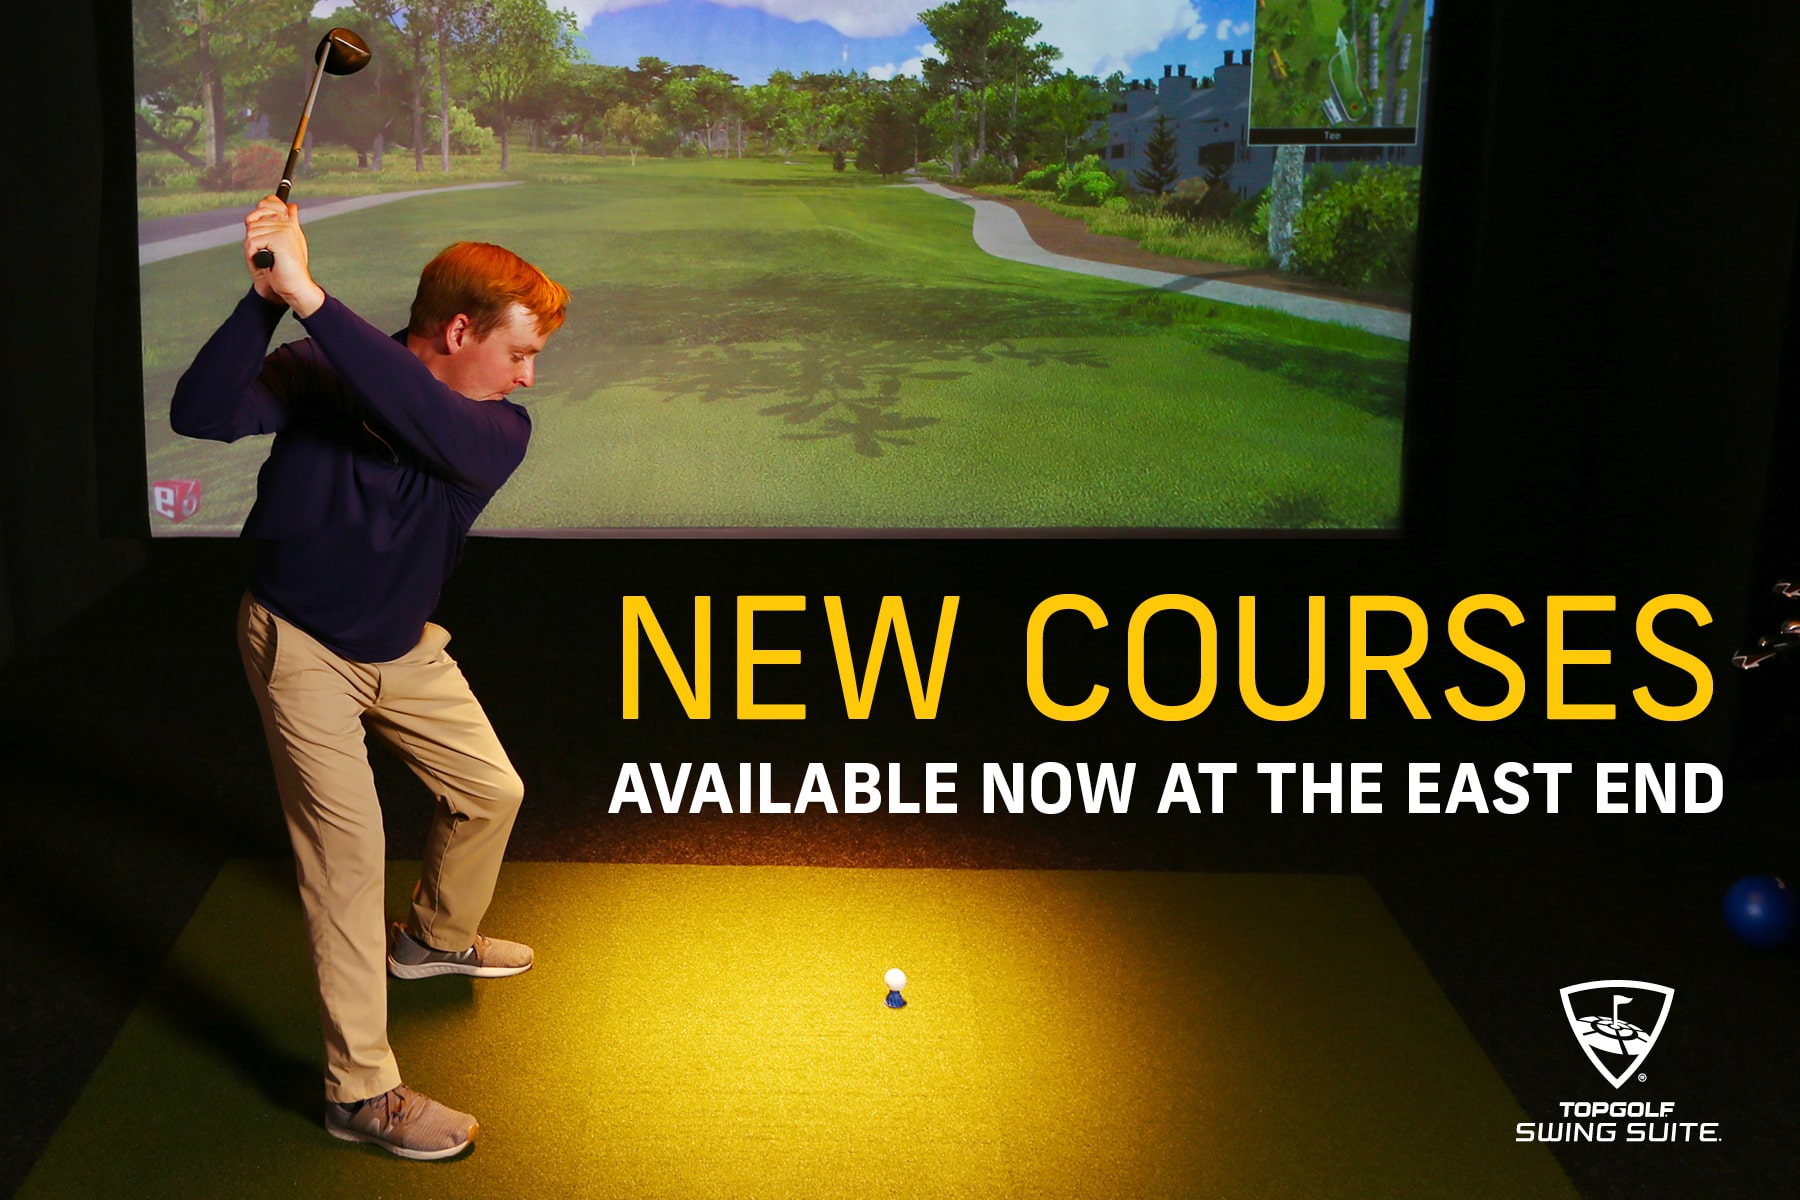 NEW COURSES AVAILABLE NOW AT THE EAST END